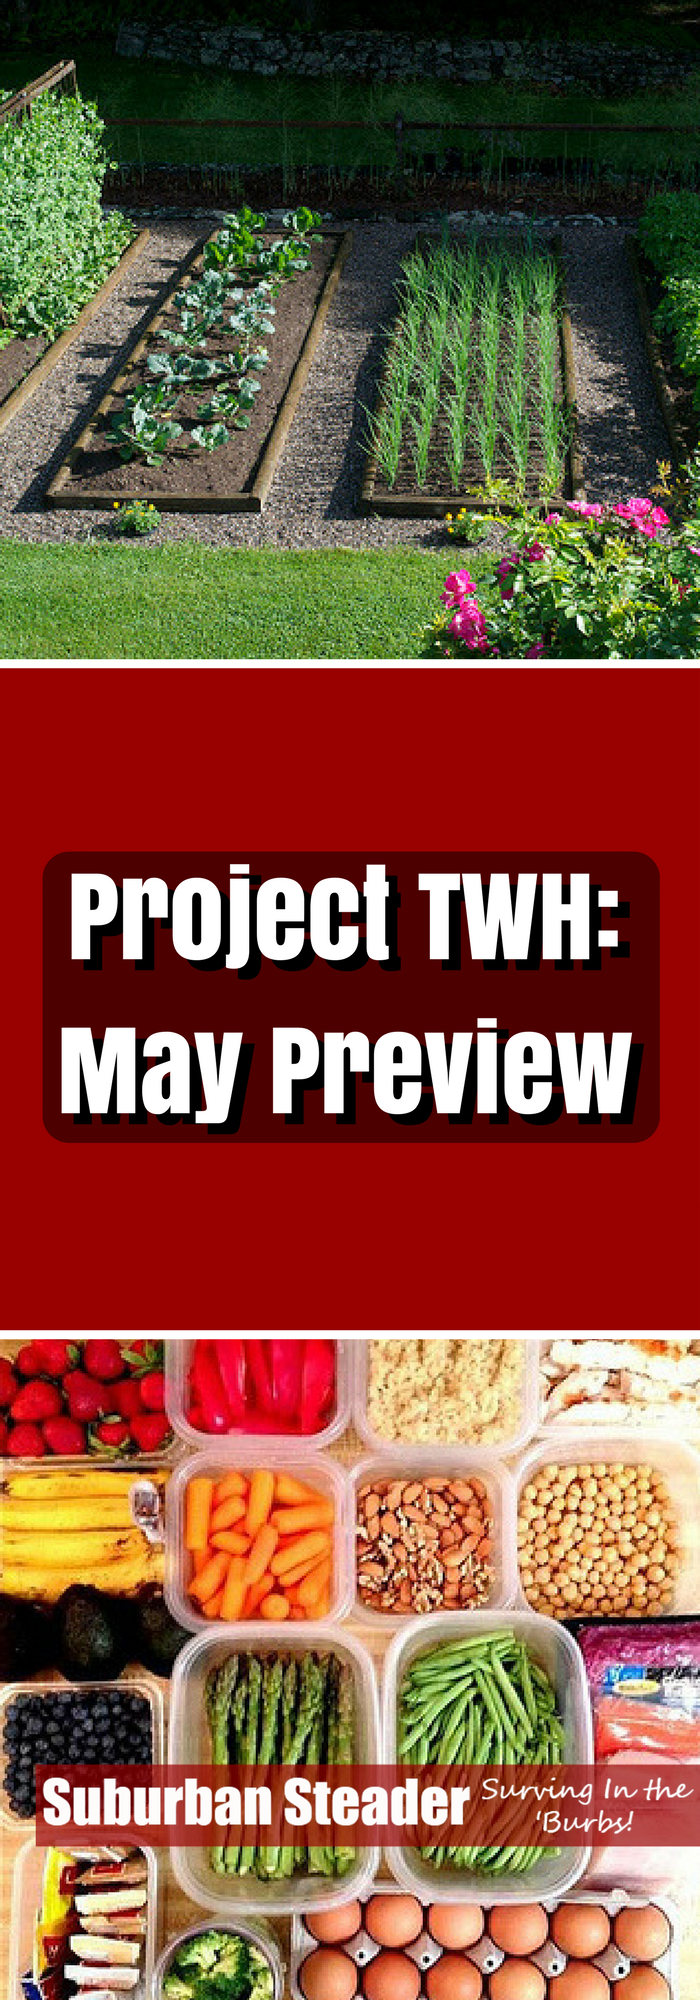 May Preview - Project TWH